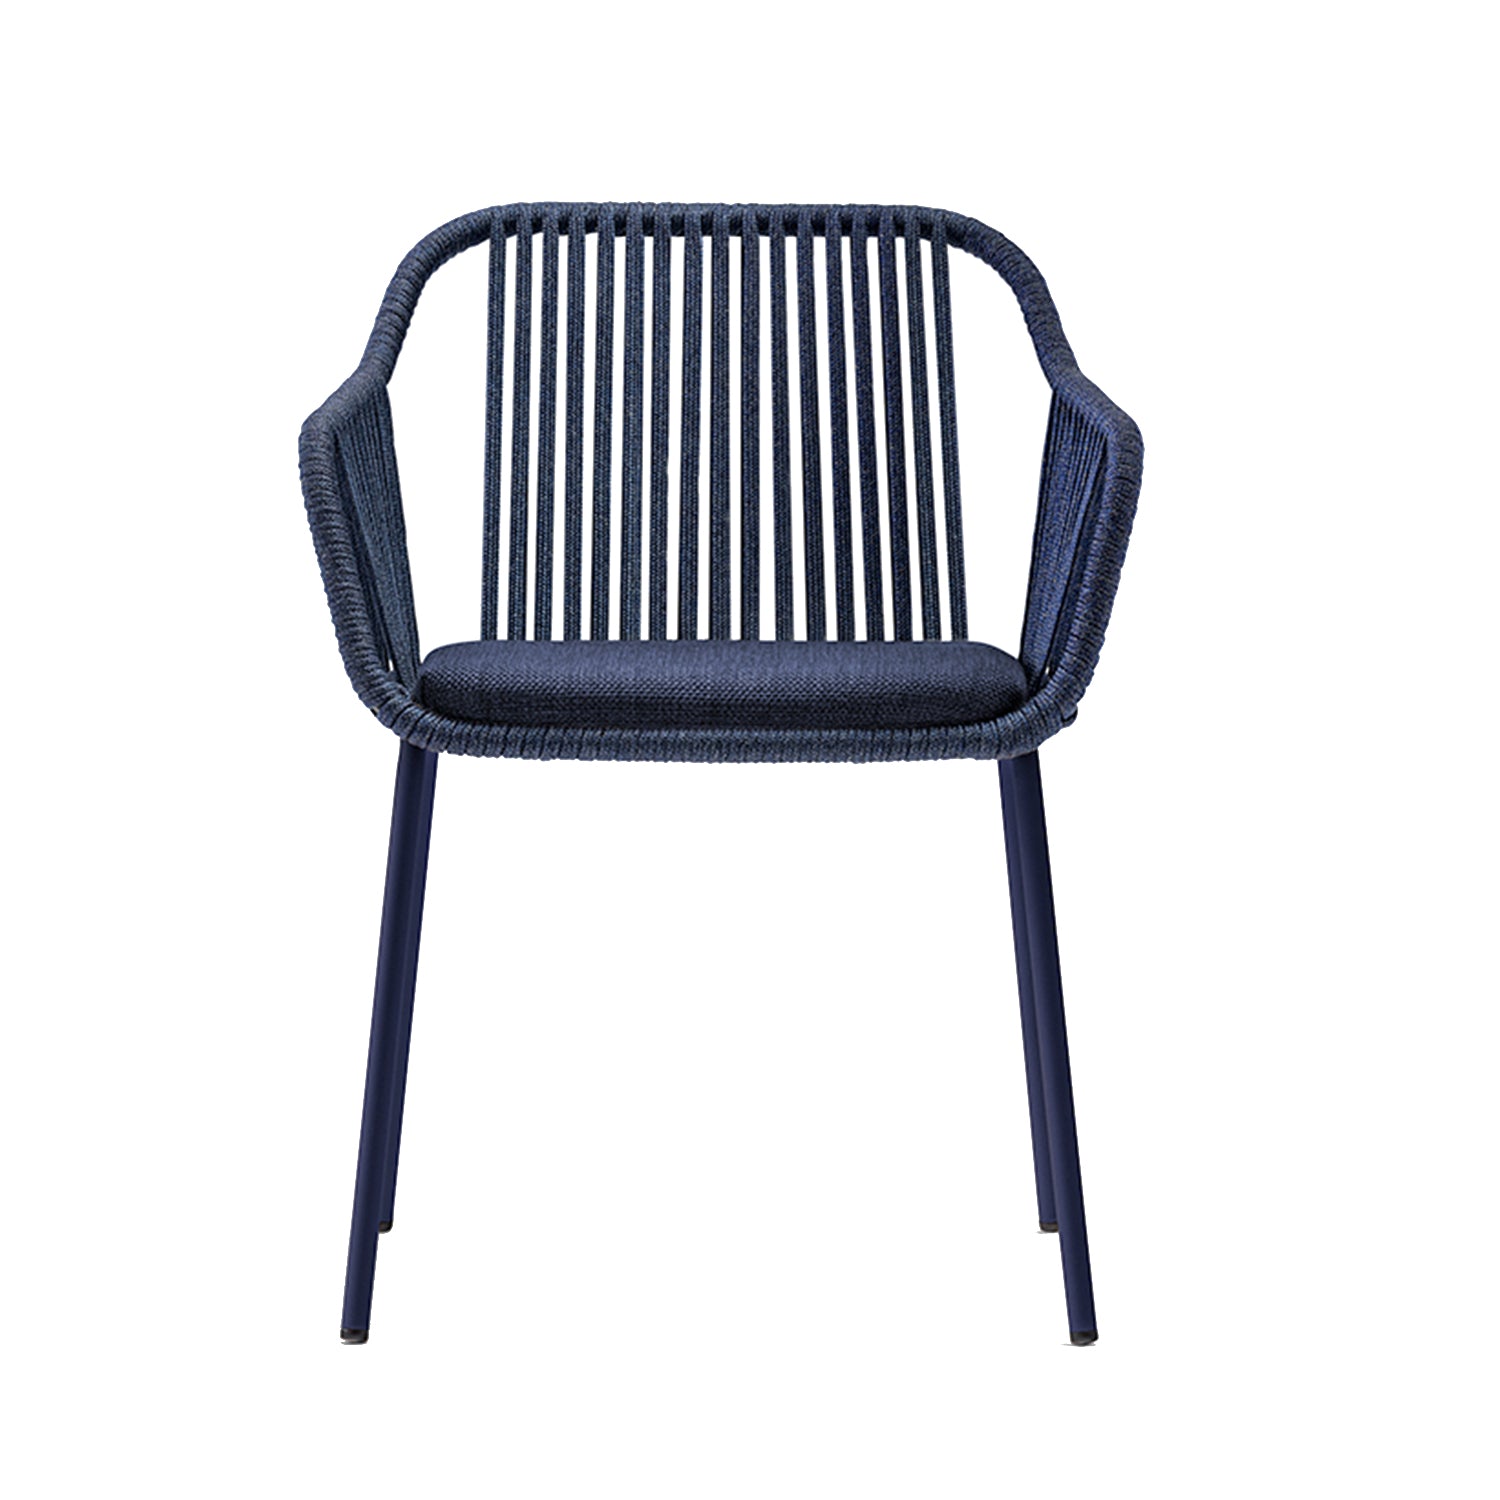 Pedrali Babila Twist outdoor dining chair with seat cushion in blue